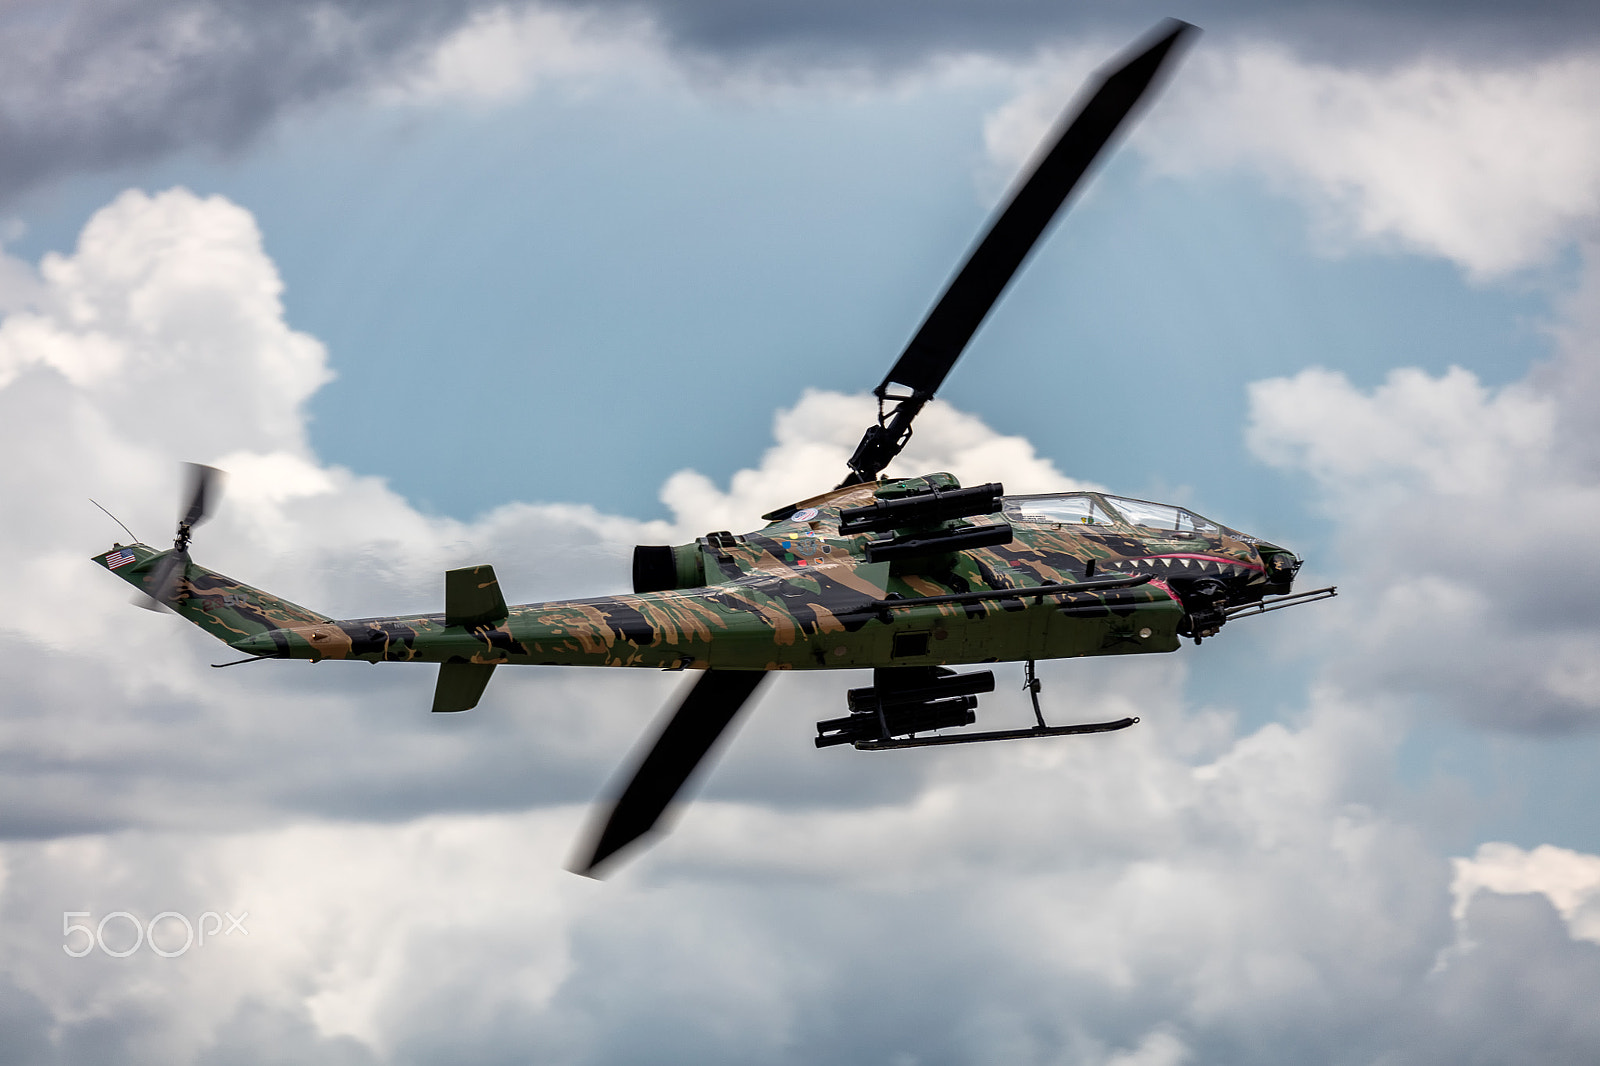 Canon EOS 5DS + 150-600mm F5-6.3 DG OS HSM | Sports 014 sample photo. Ah-1f cobra helicopter in flight photography